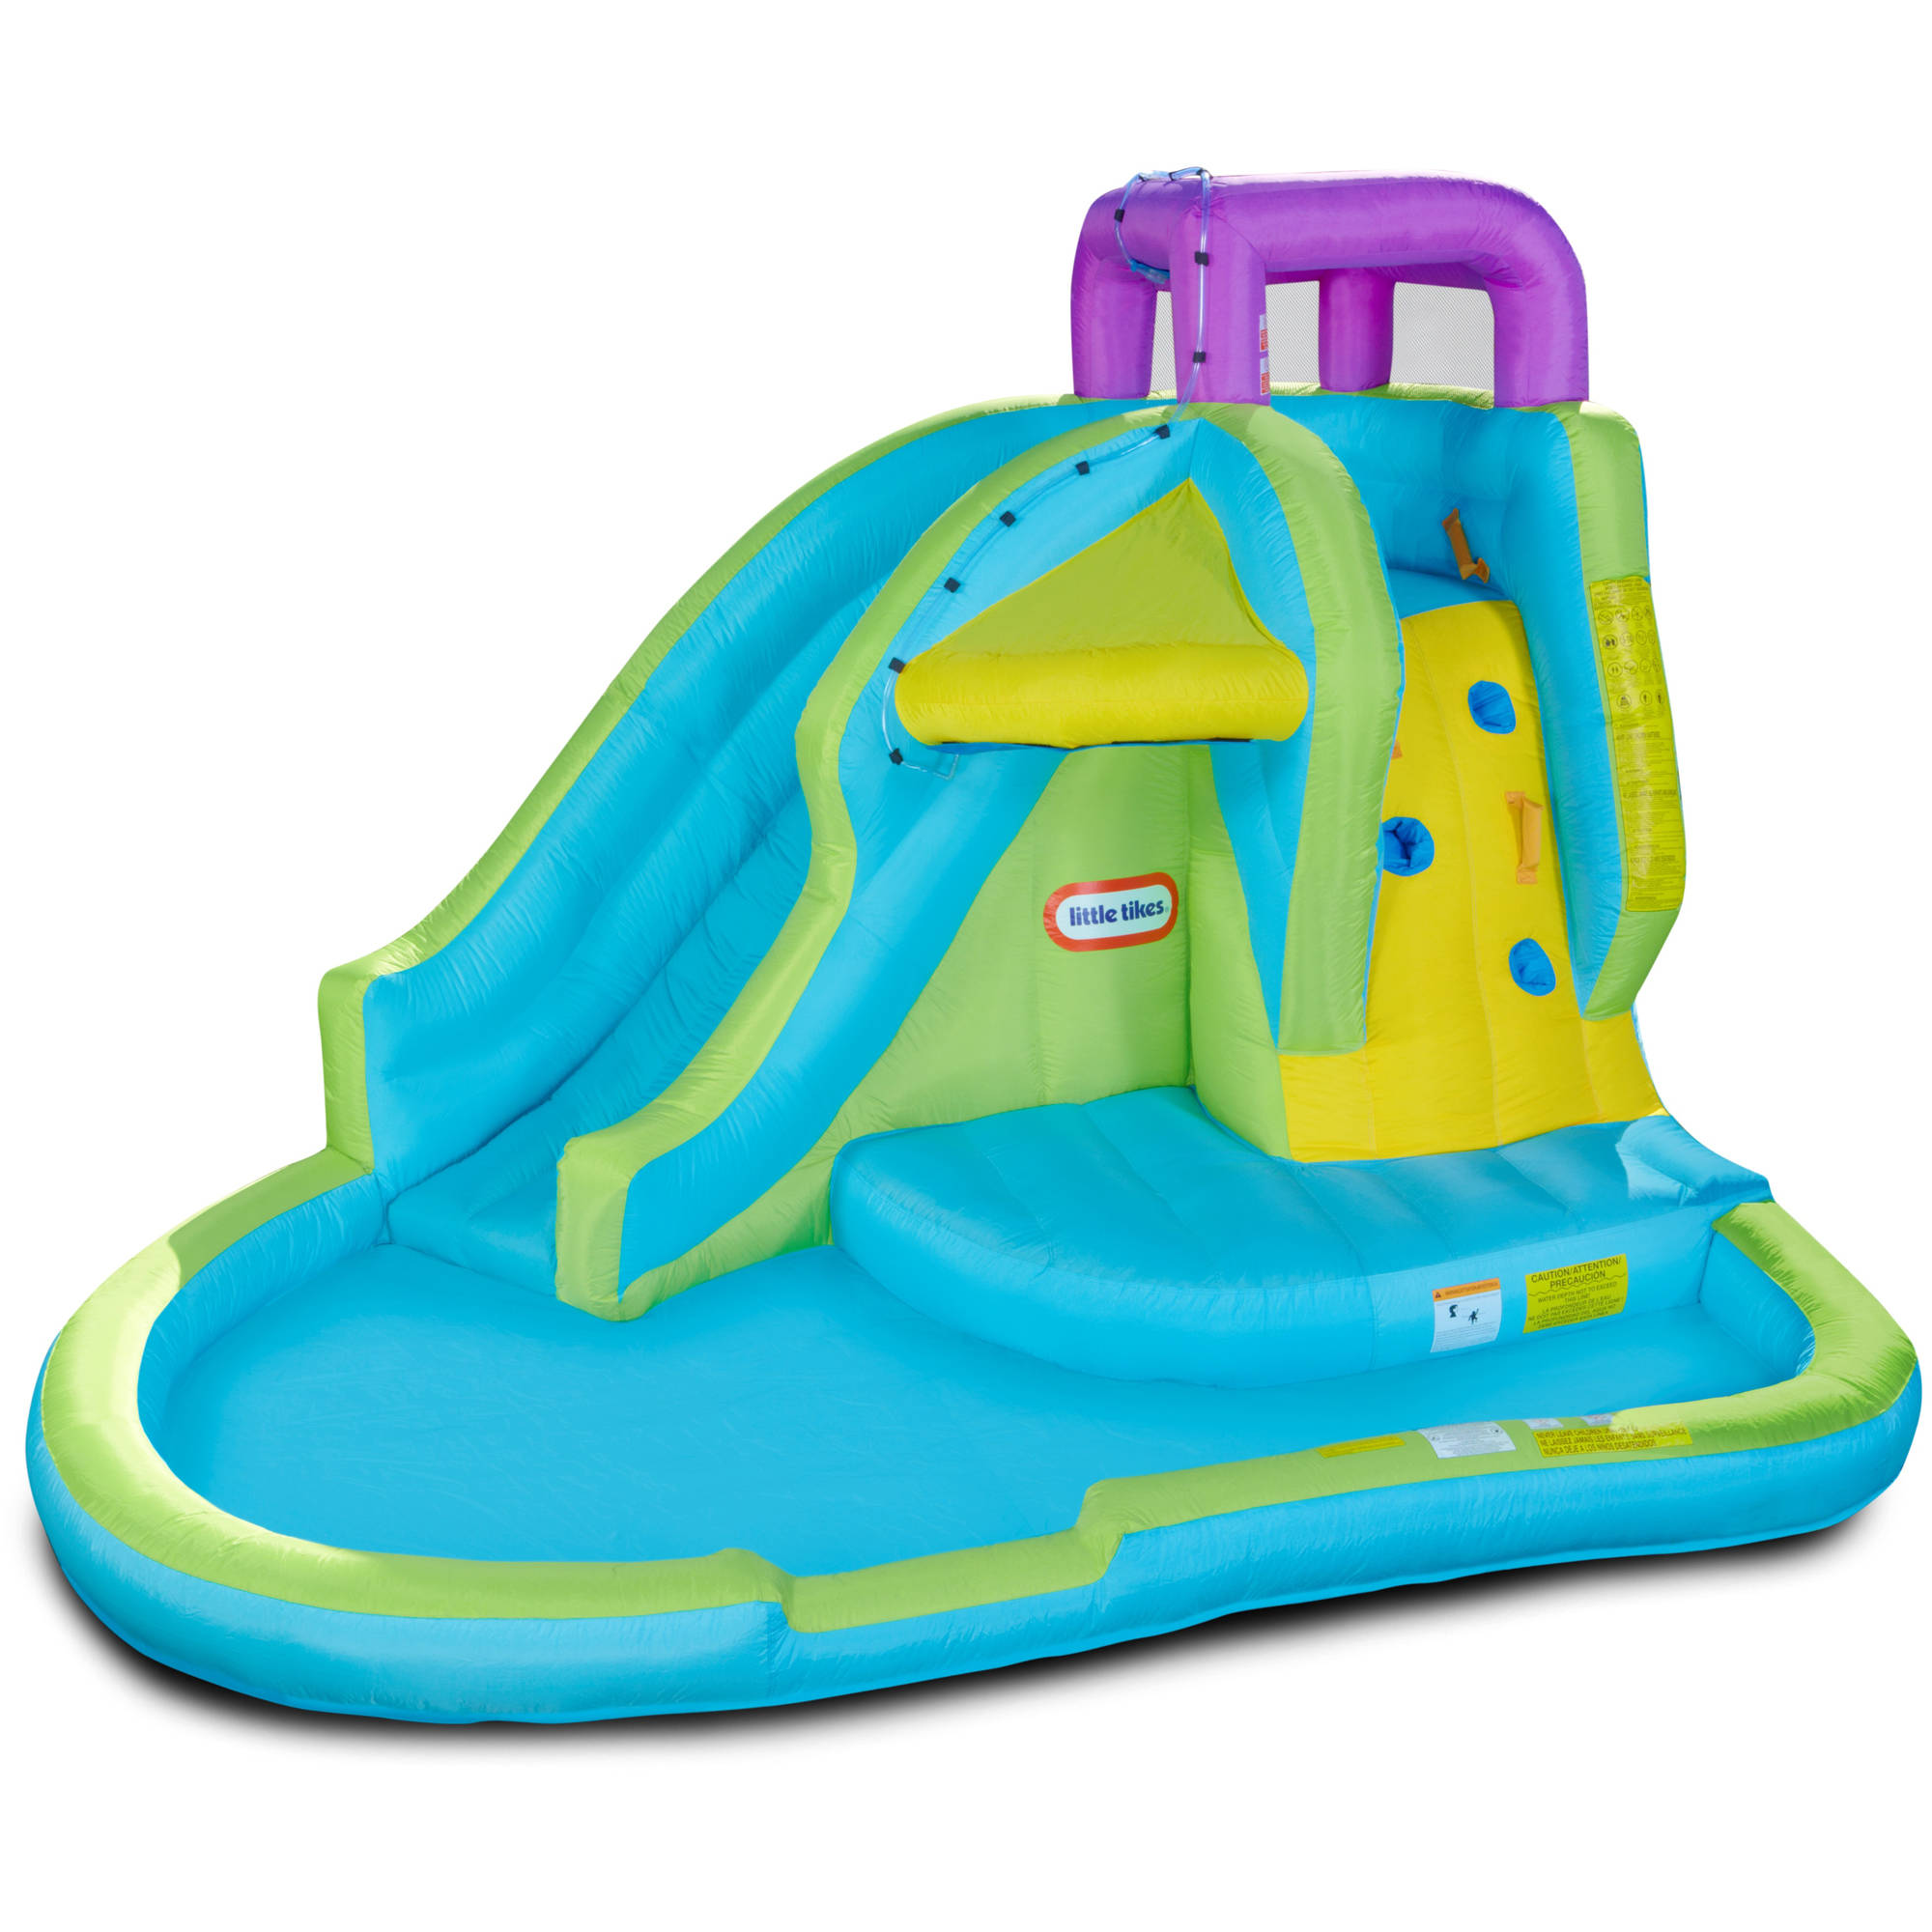 Little Tikes Made in the Shade Waterslide - image 1 of 5